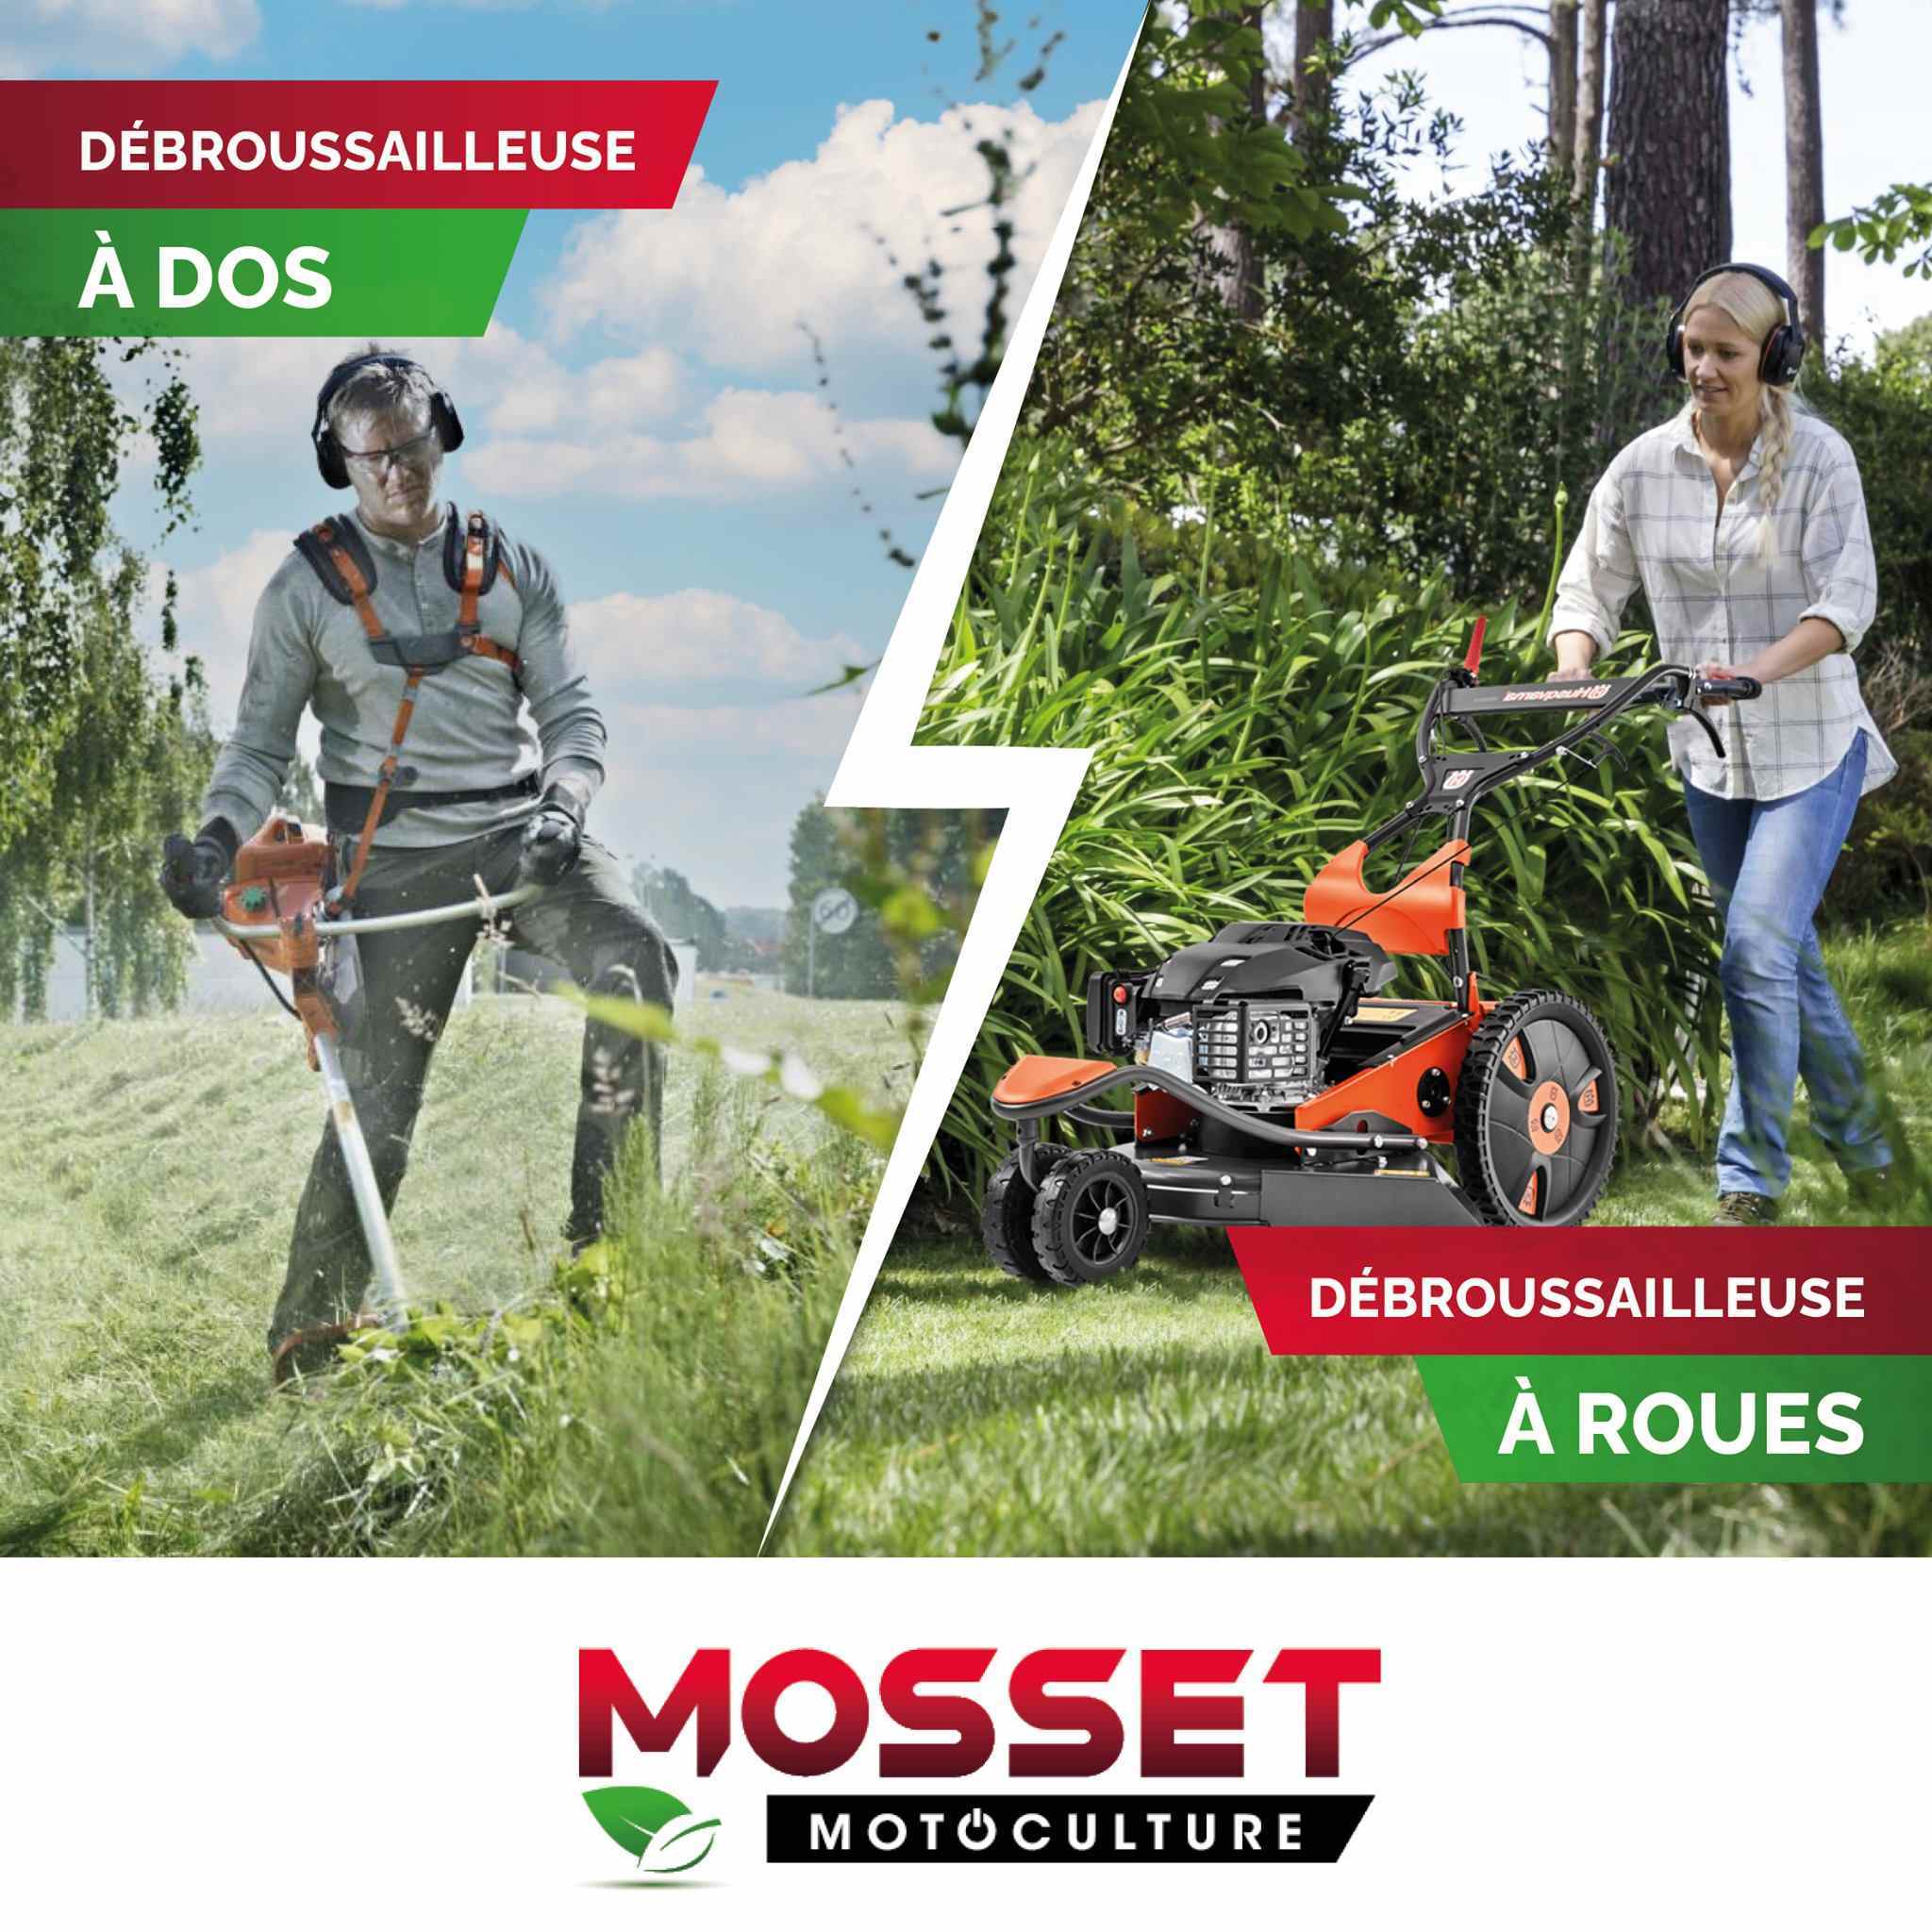 Mosset Debroussailleuse dos Roues